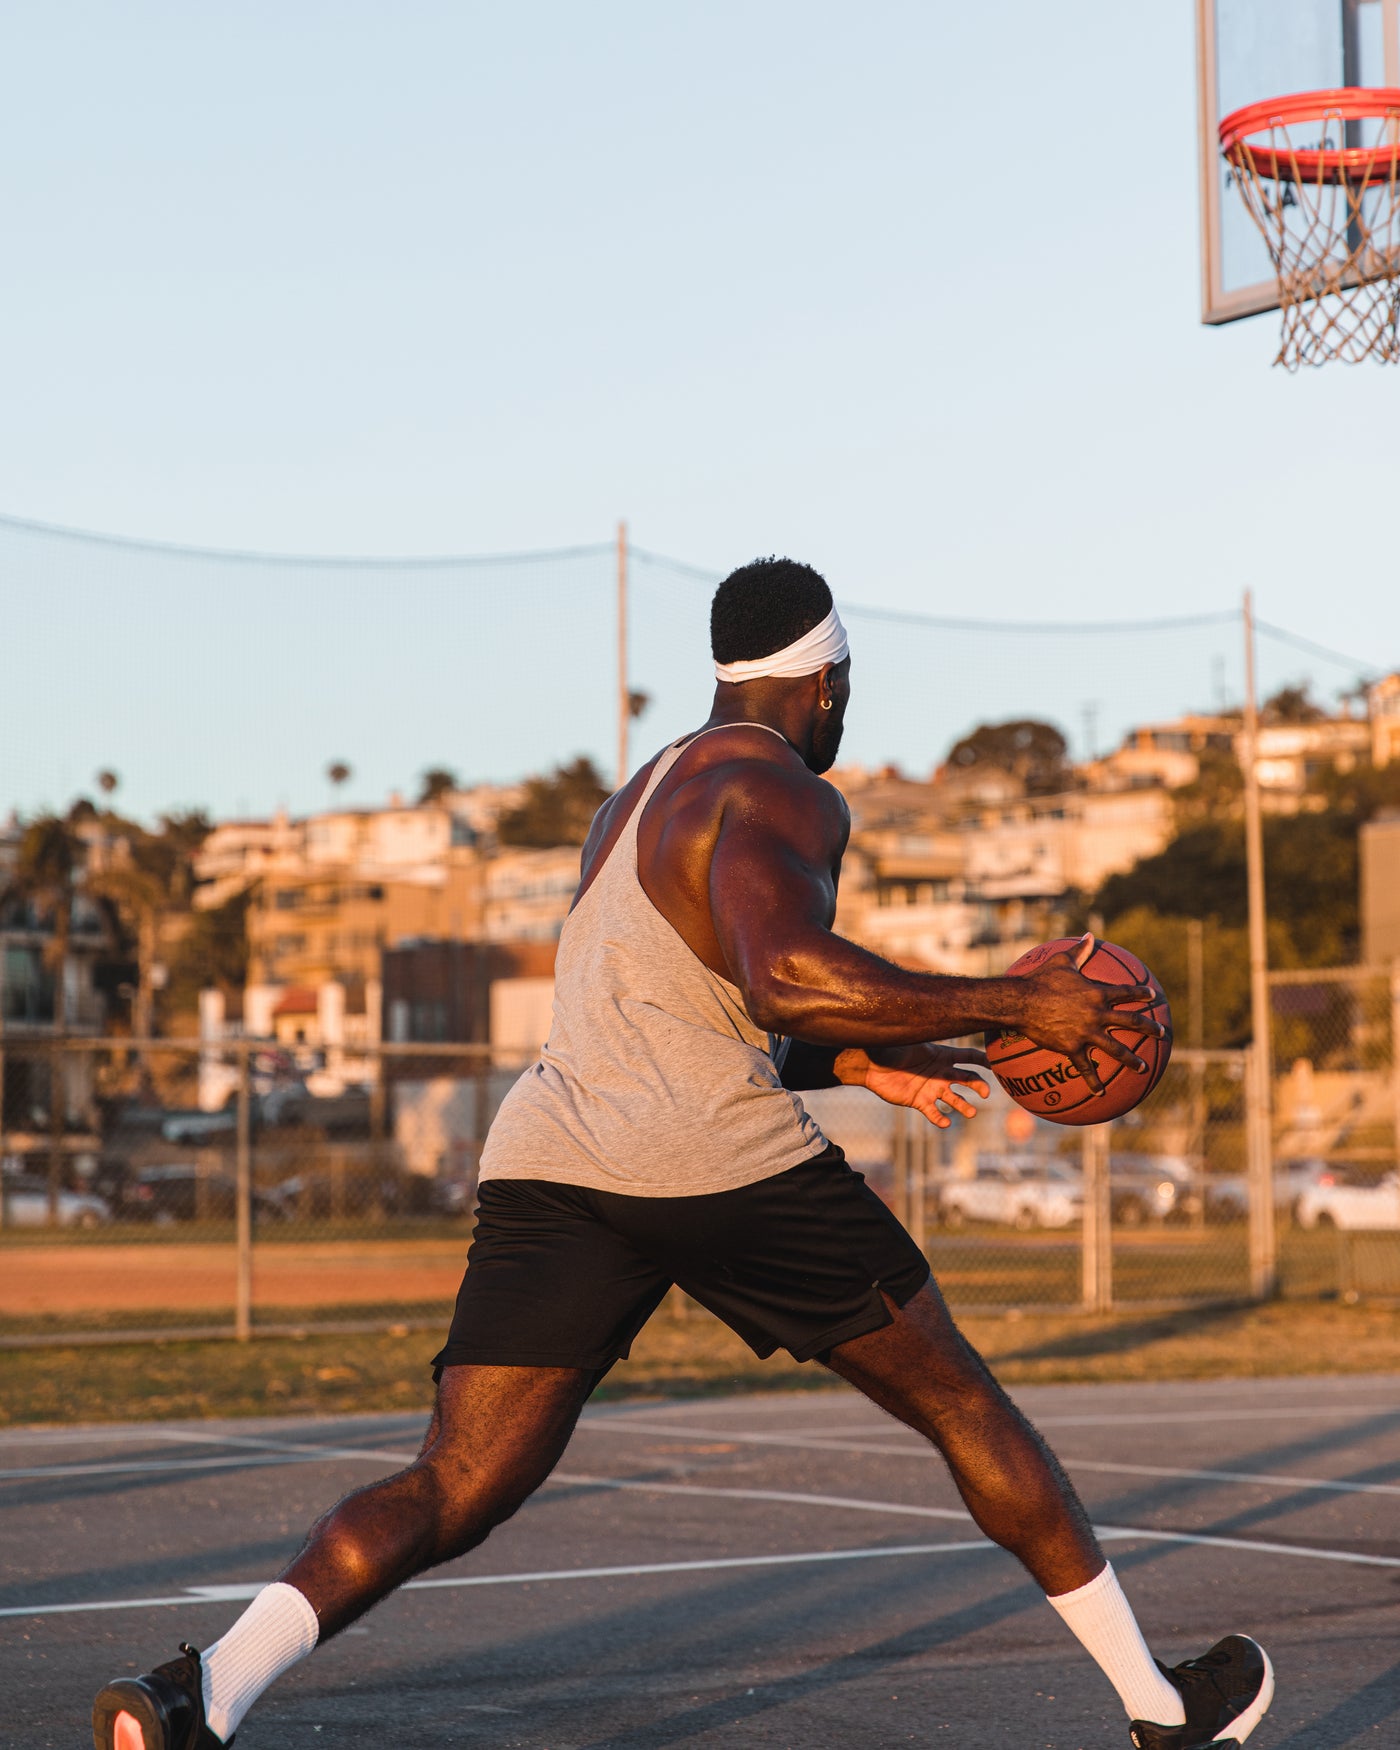 Athlete playing basketball in the park